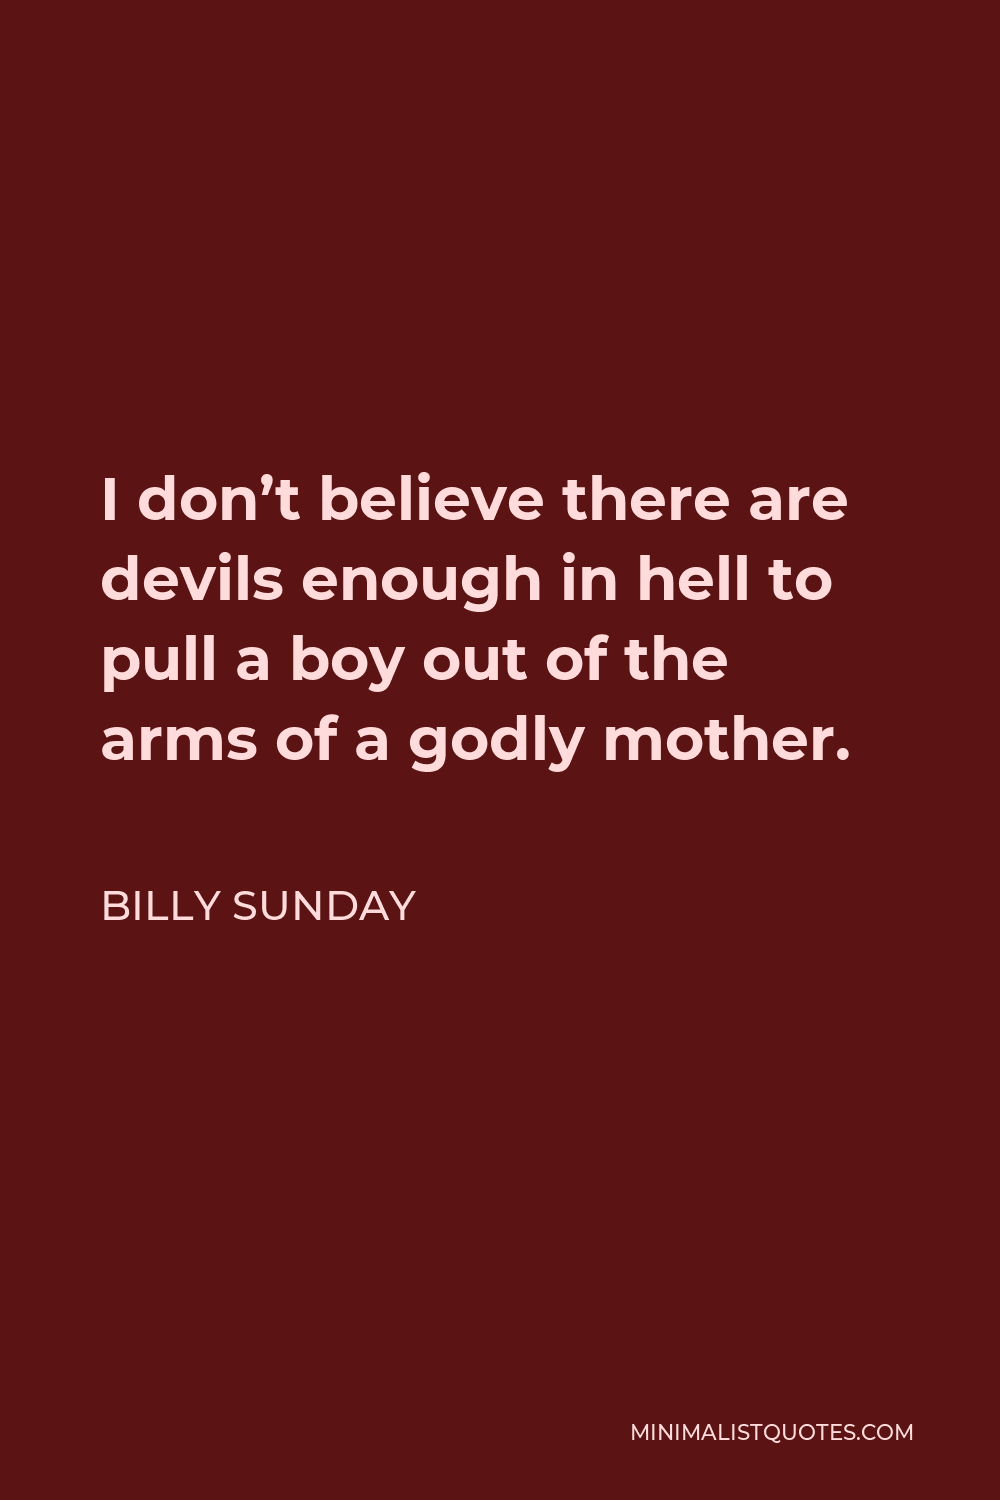 Billy Sunday Quote - I don’t believe there are devils enough in hell to pull a boy out of the arms of a godly mother.